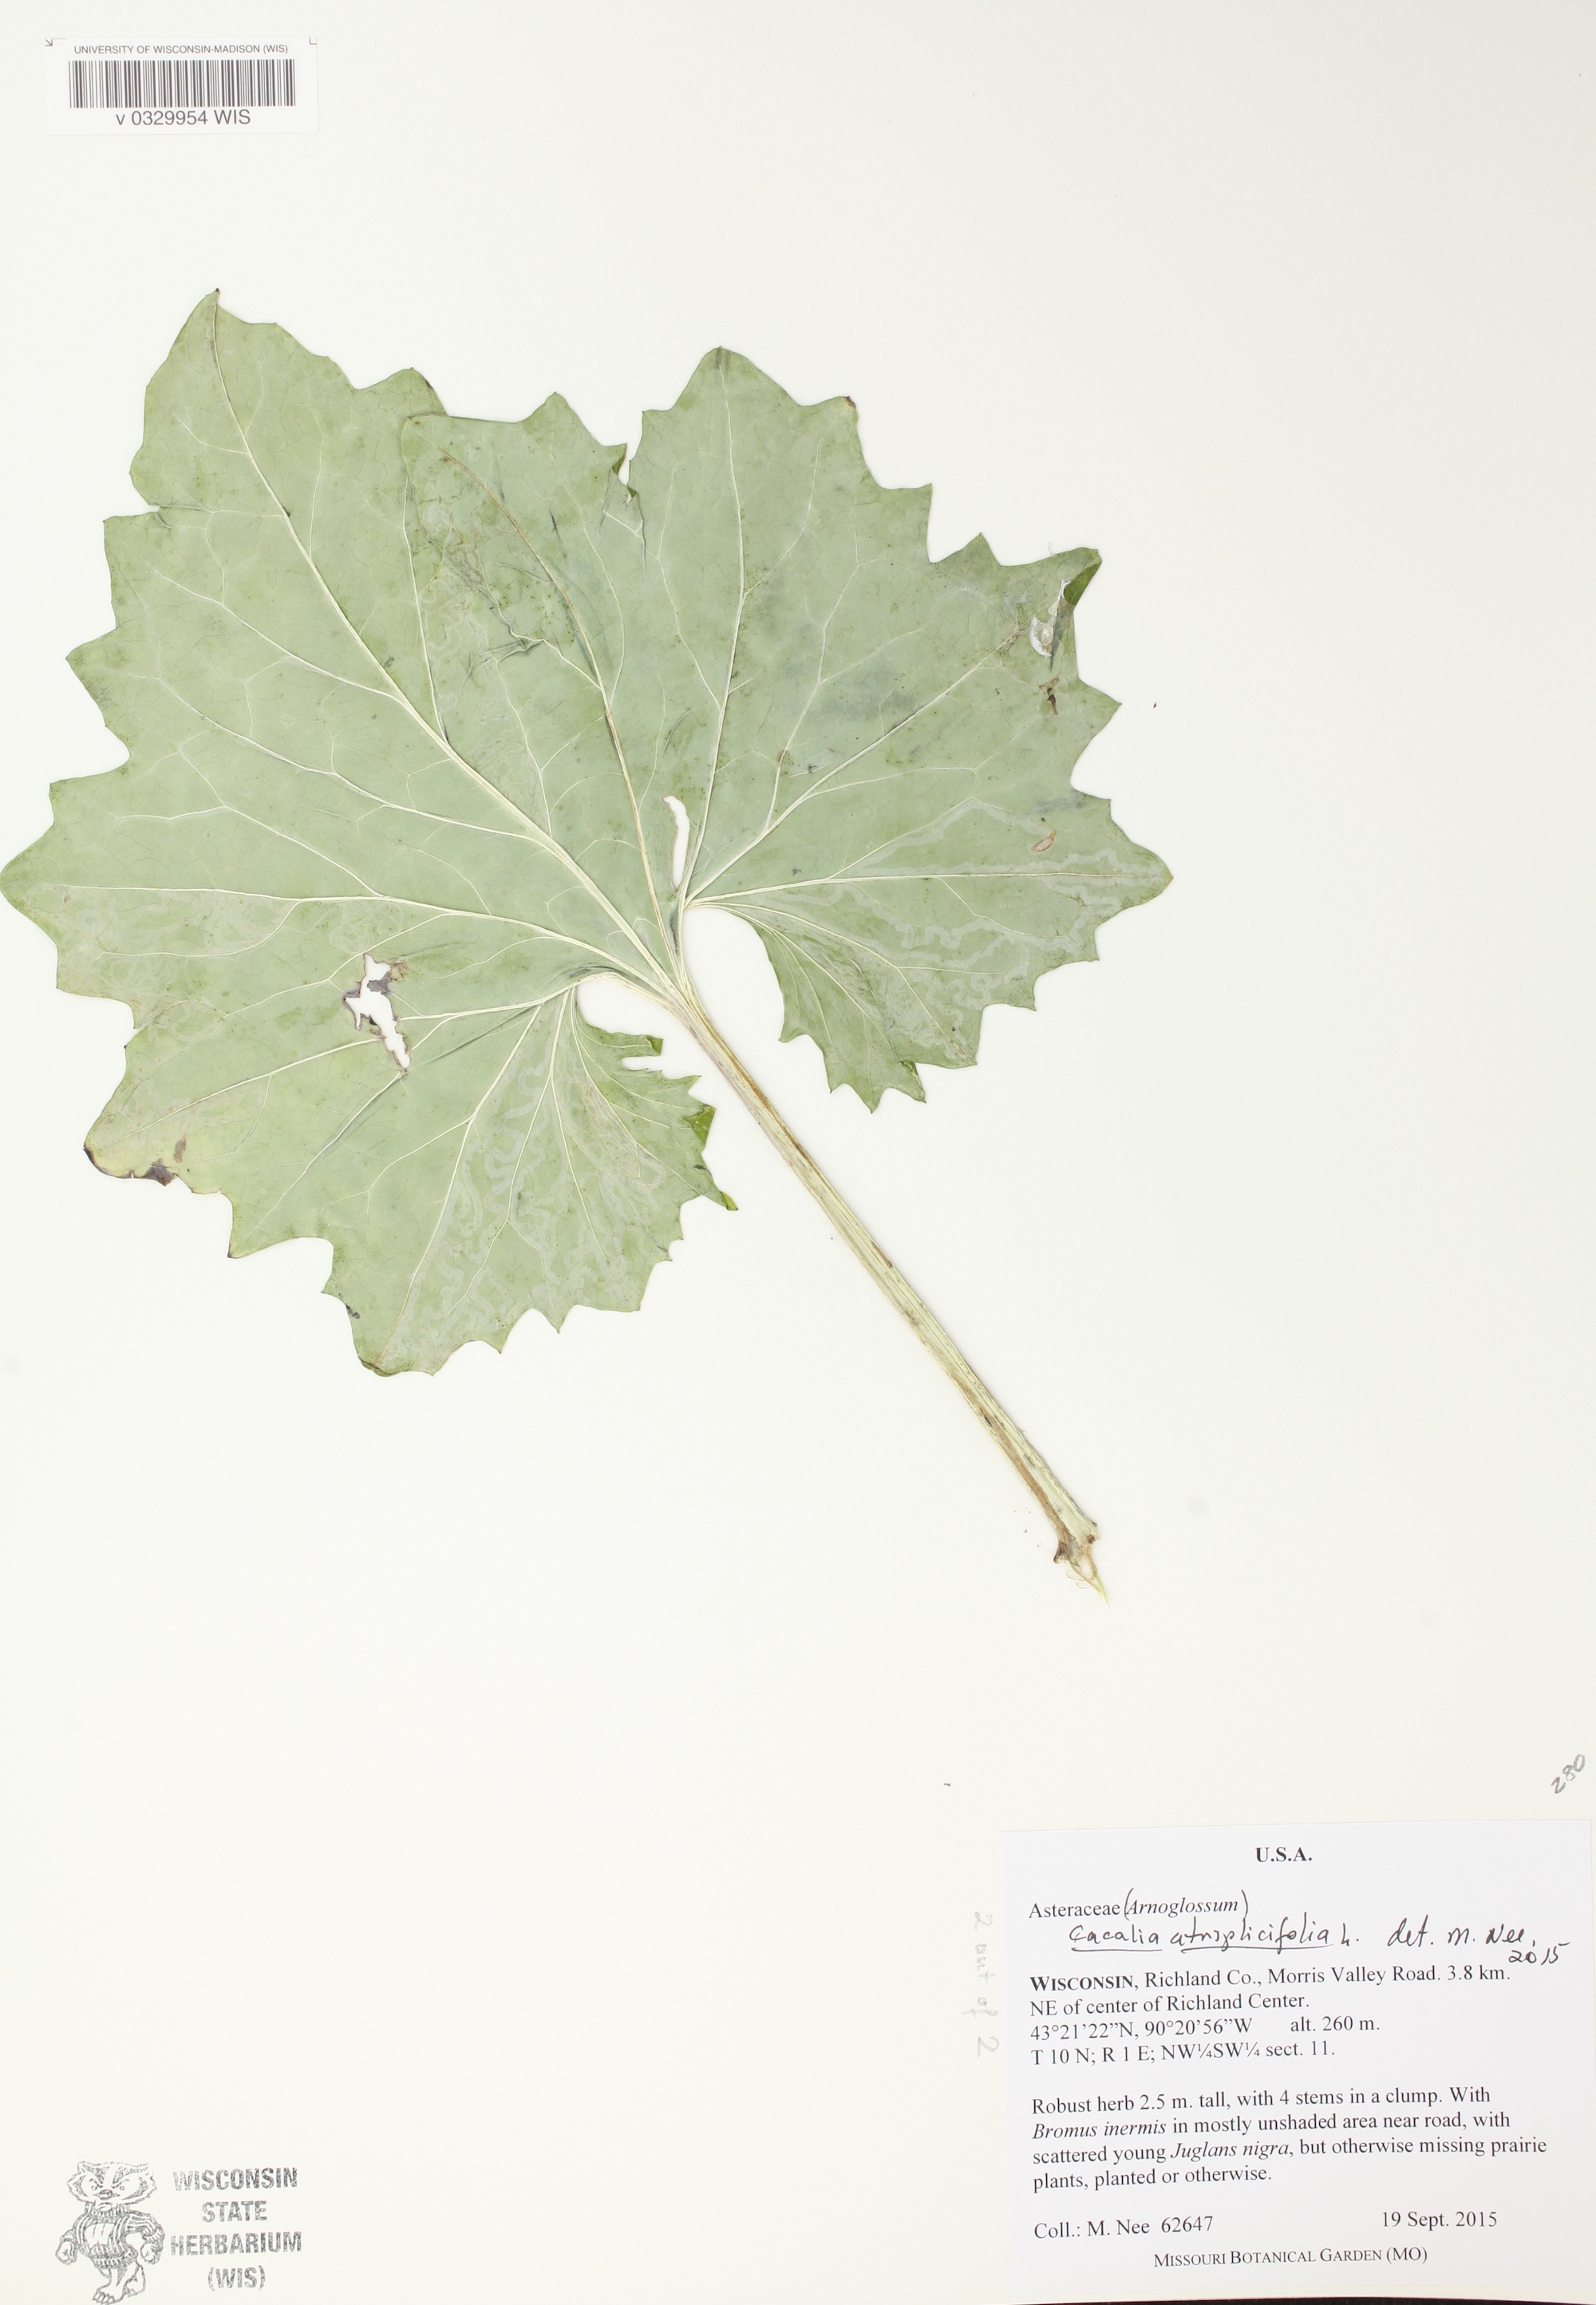 Pale Indian Plantain leaf specimen collected in Richland County on September 19, 2015.